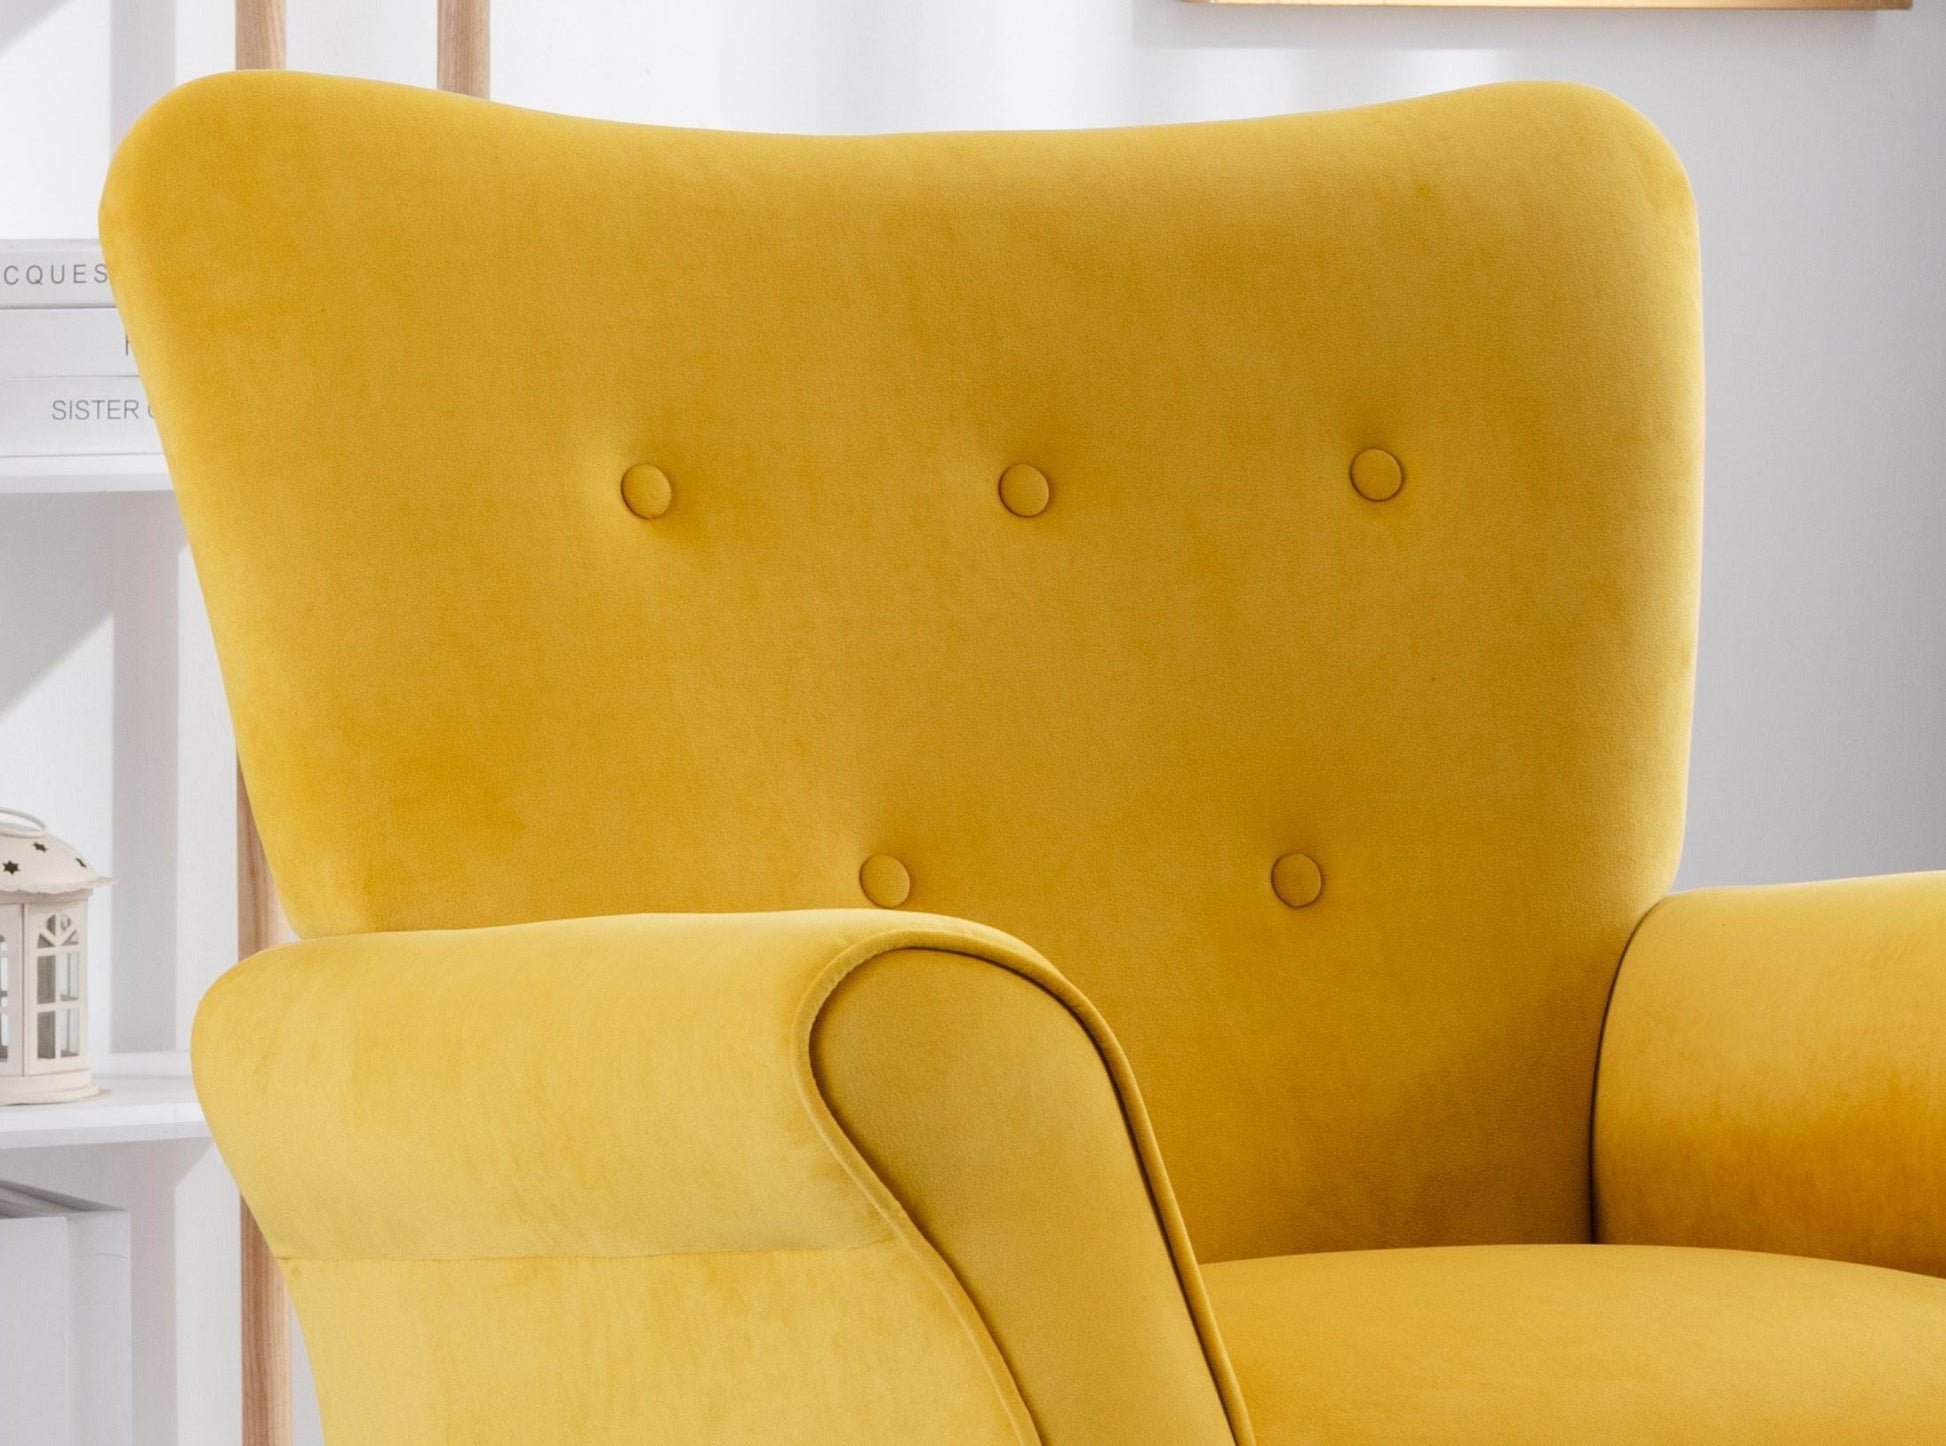 Stylish Living Room Furniture 1pc Accent Chair Yellow yellow-primary living space-modern-solid wood